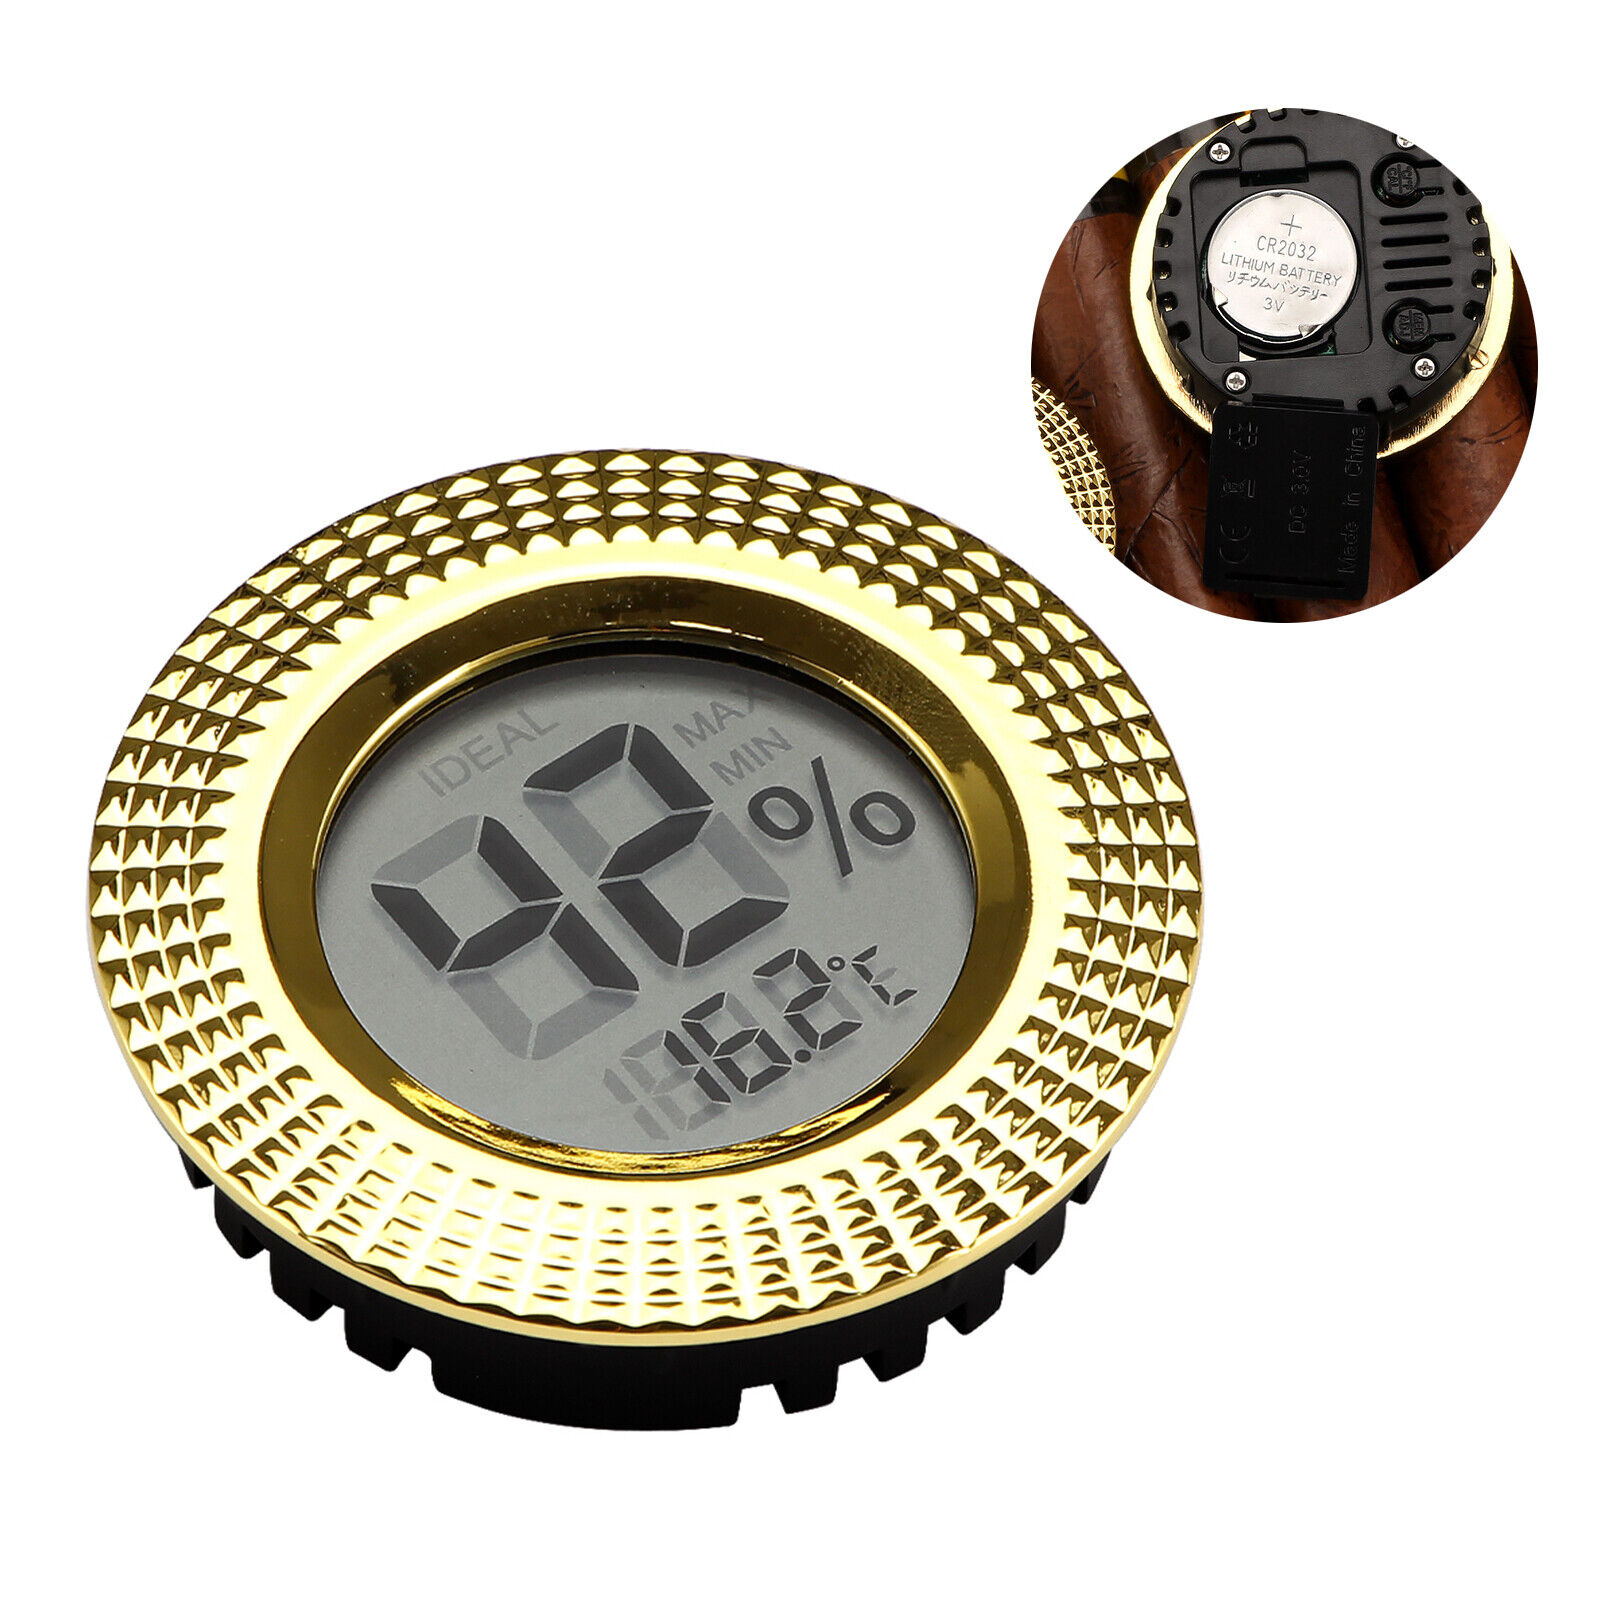 1 PC Travel Digital Cigar Humidor Hygrometer Round Gold Gauge New Thermometer